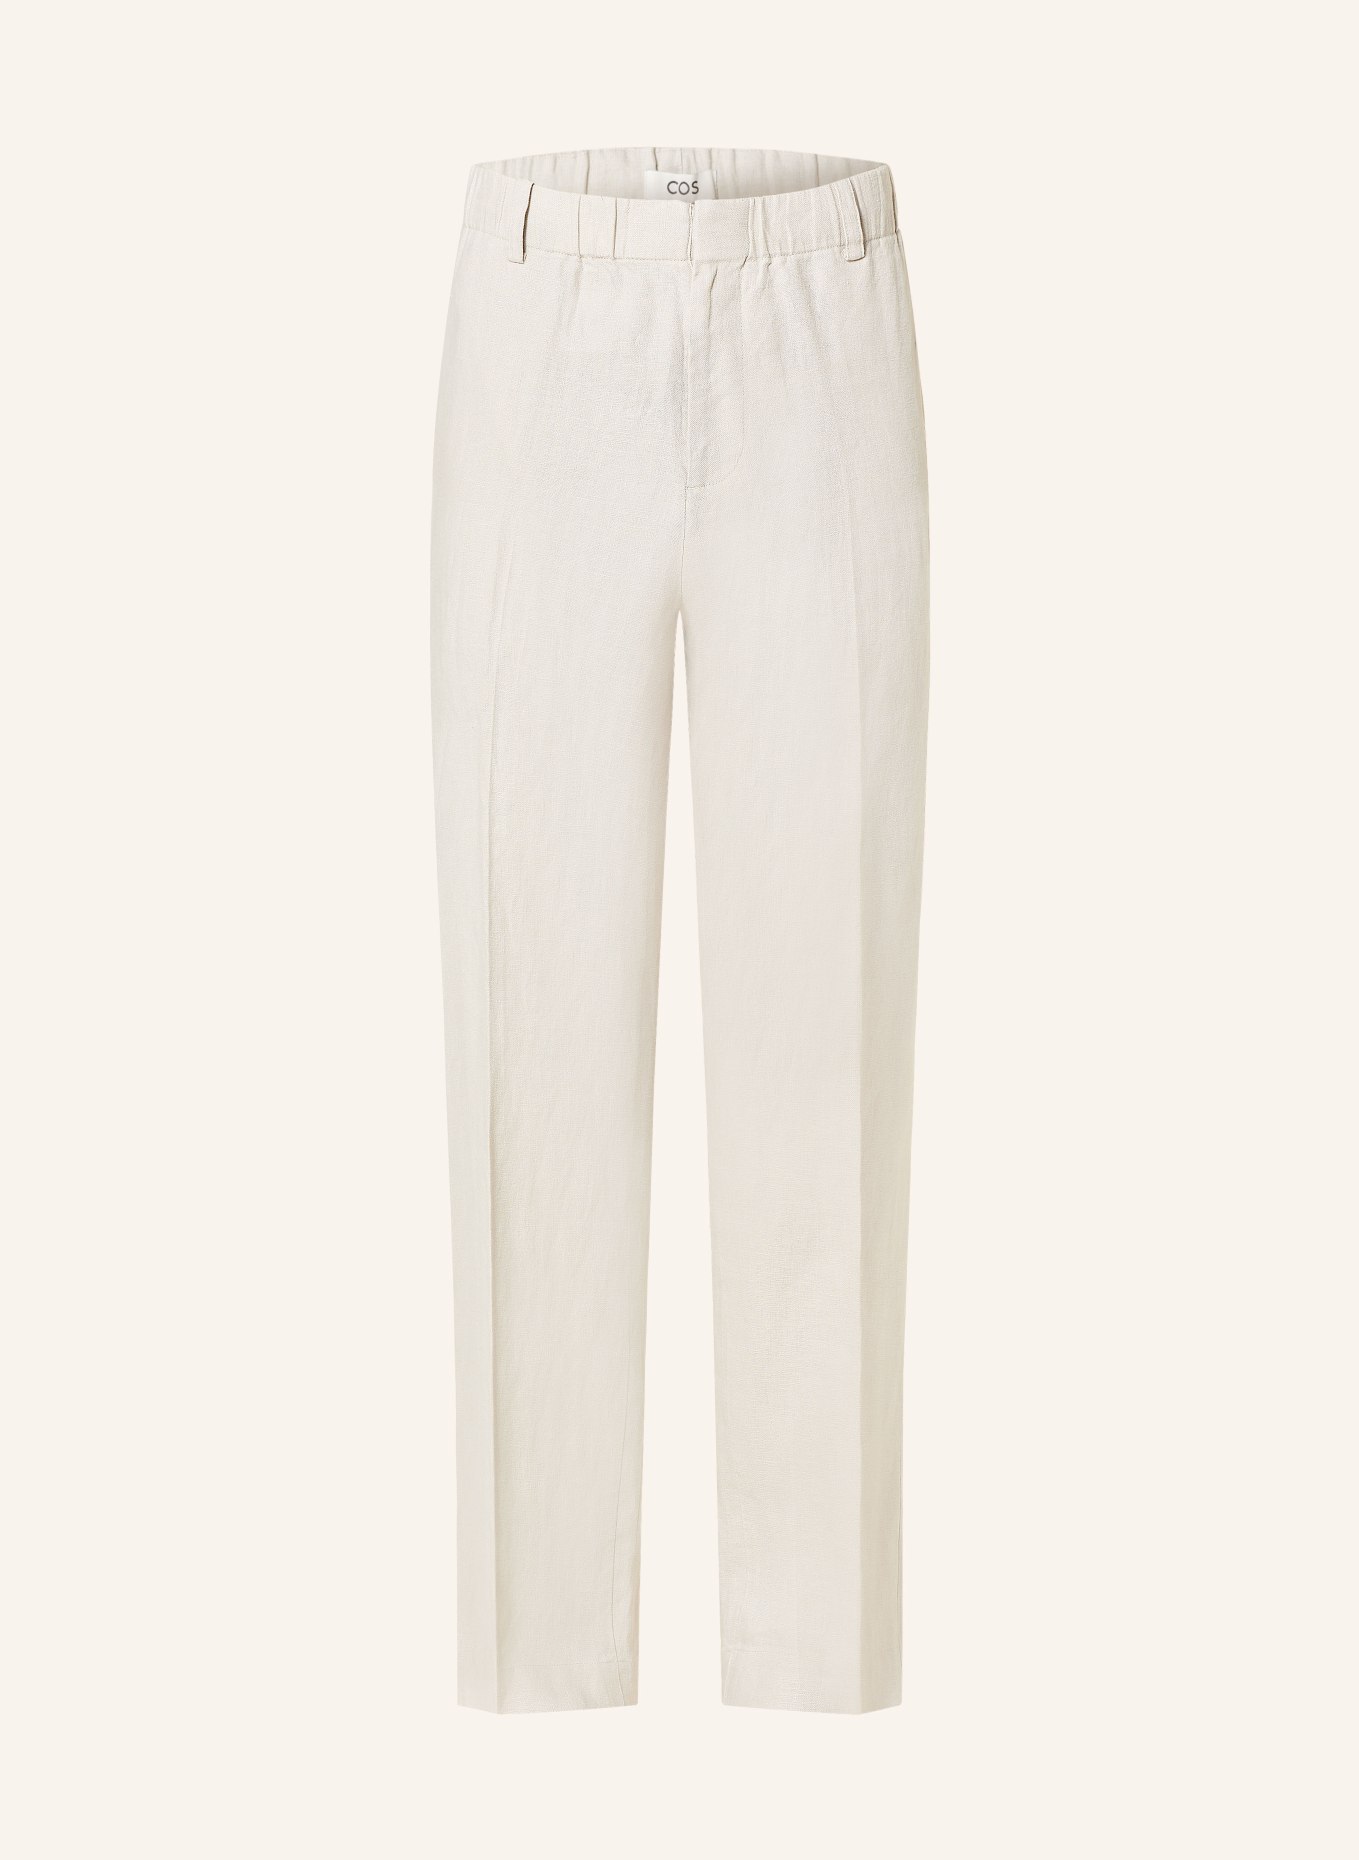 COS Leinenhose Relaxed Fit, Farbe: CREME (Bild 1)